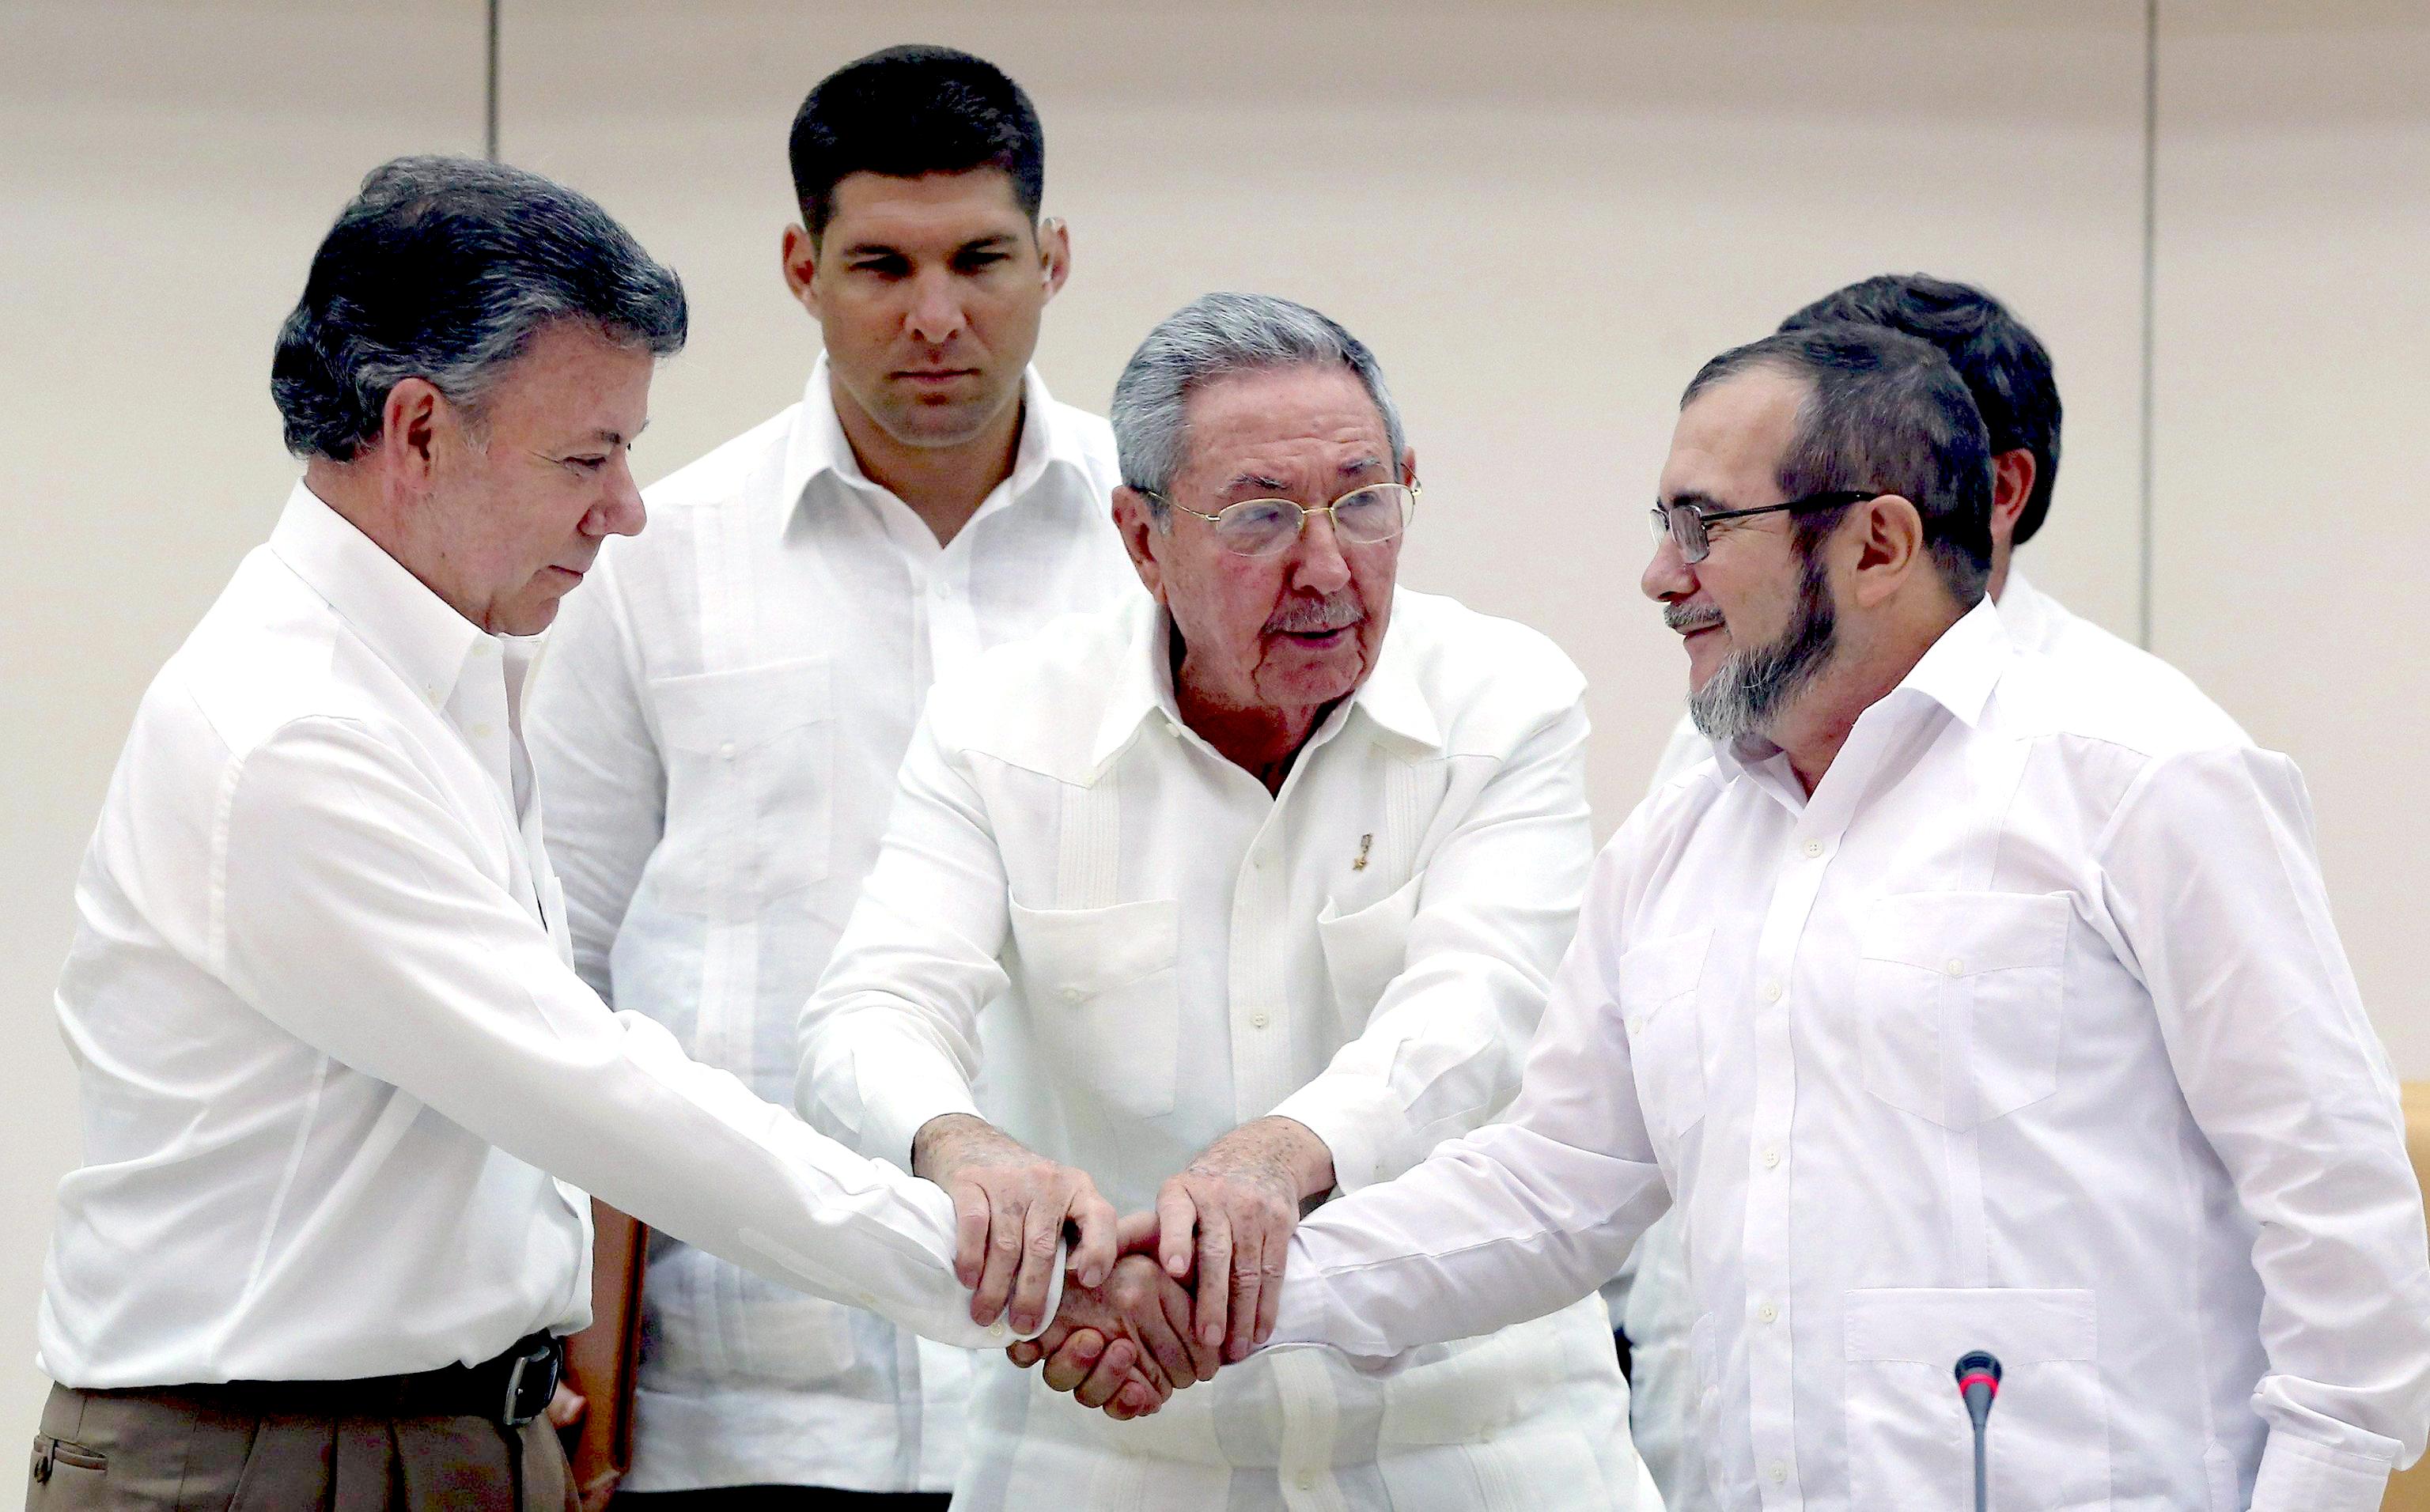 Cuban President Raul Castro (C) holds the hands of Colombian President Juan Manuel Santos (L) and top leader of the FARC